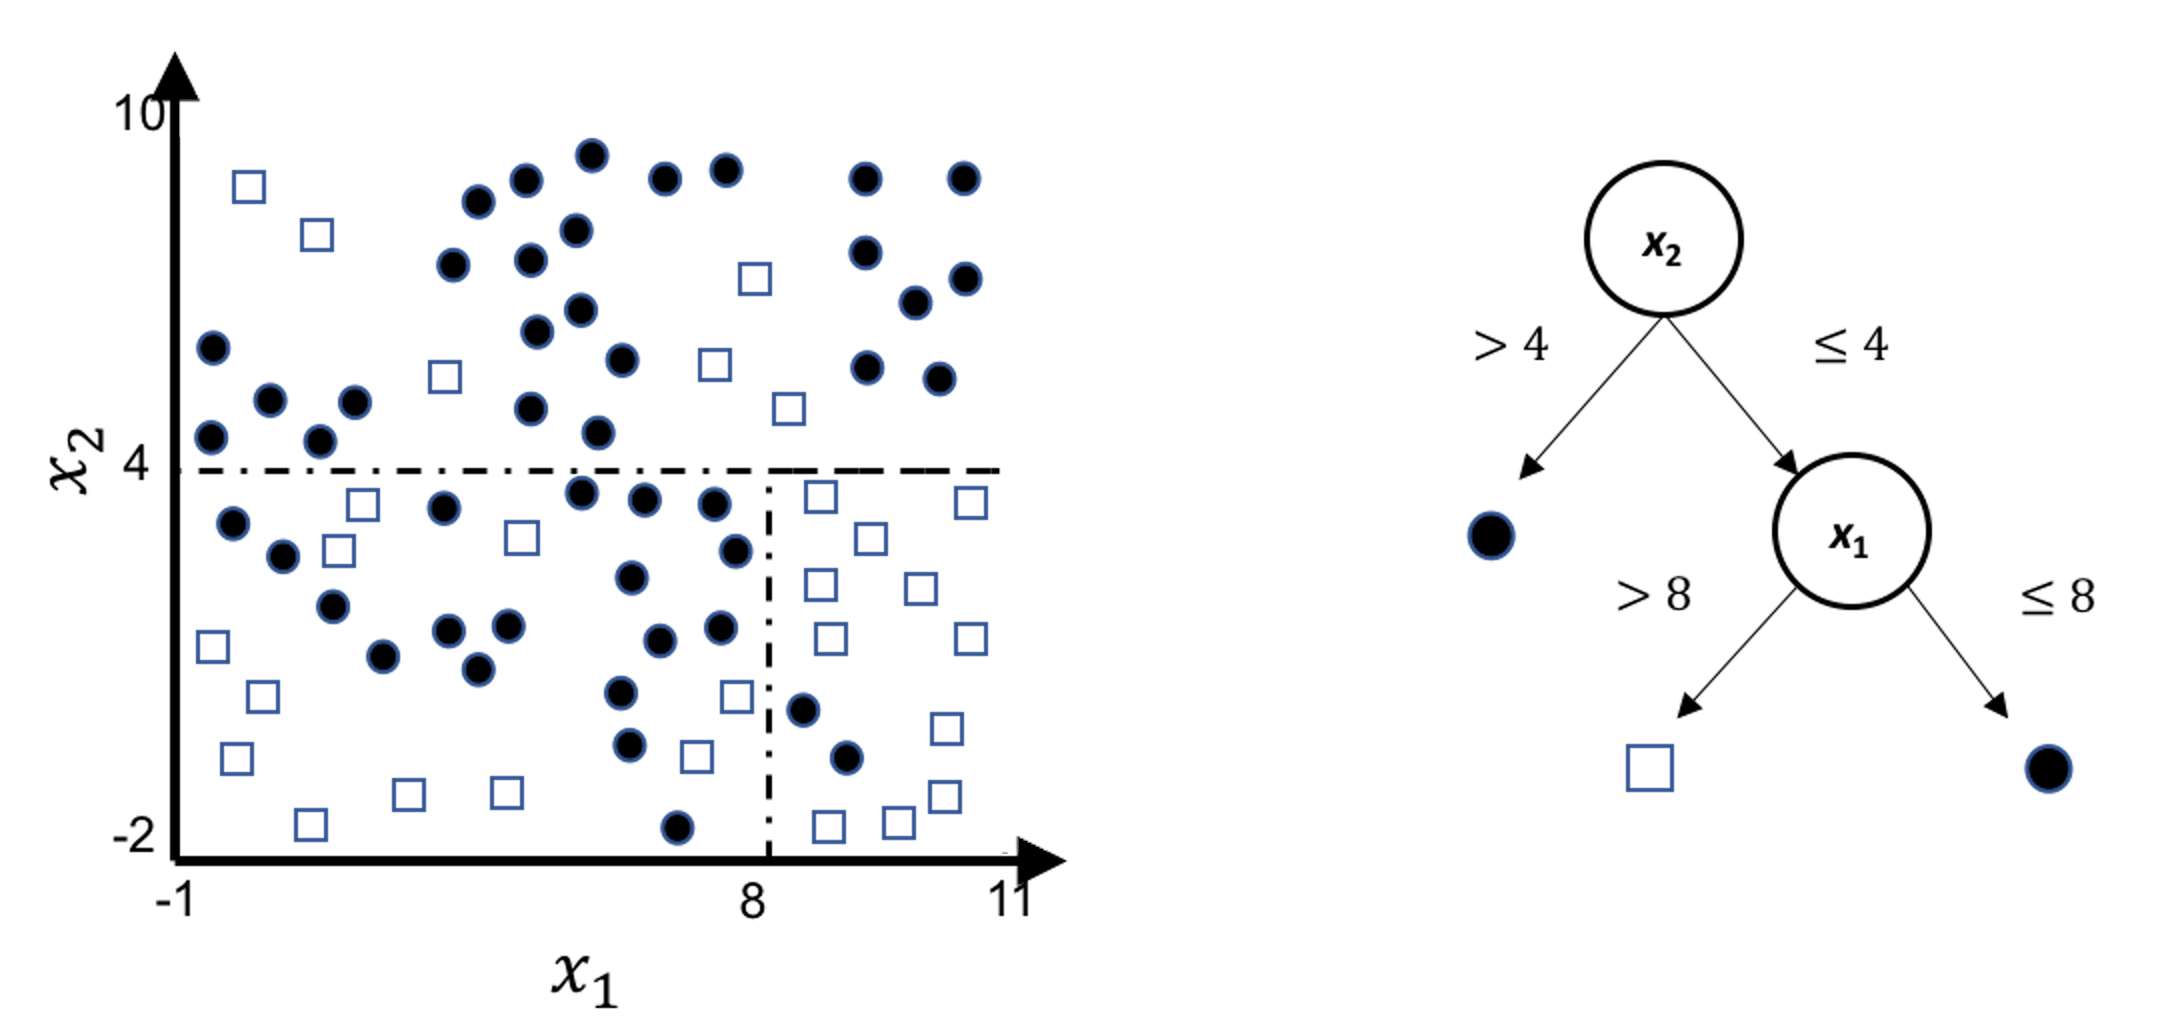 Illustration of a decision tree model for a binary classification problem (i.e., the solid circles and empty squares represent data points from two classes), built on two predictors (i.e., $x_1$ and $x_2$); (left) is the scatterplot of the data overlaid with the decision boundary of the decision tree model, which is shown in the (right)